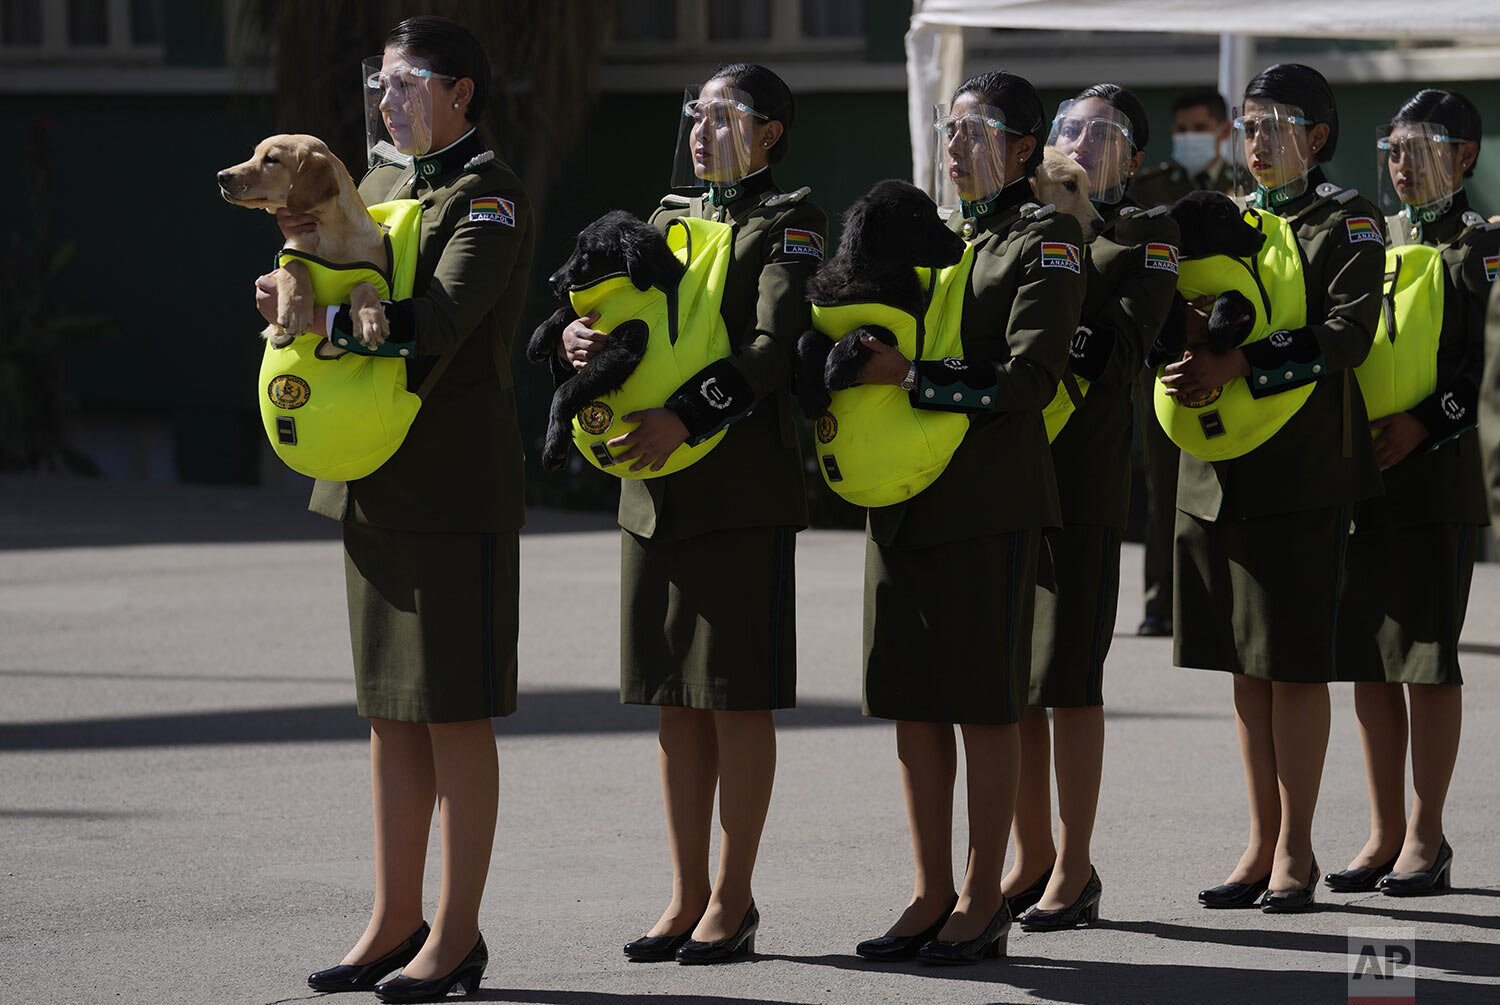  Police introduce a litter of golden retriever puppies, some of which are black golden retrievers, to be trained as police dogs during a ceremony at the National Police Academy in La Paz, Bolivia, Aug. 16, 2021, the date of the feast day for Saint Ro